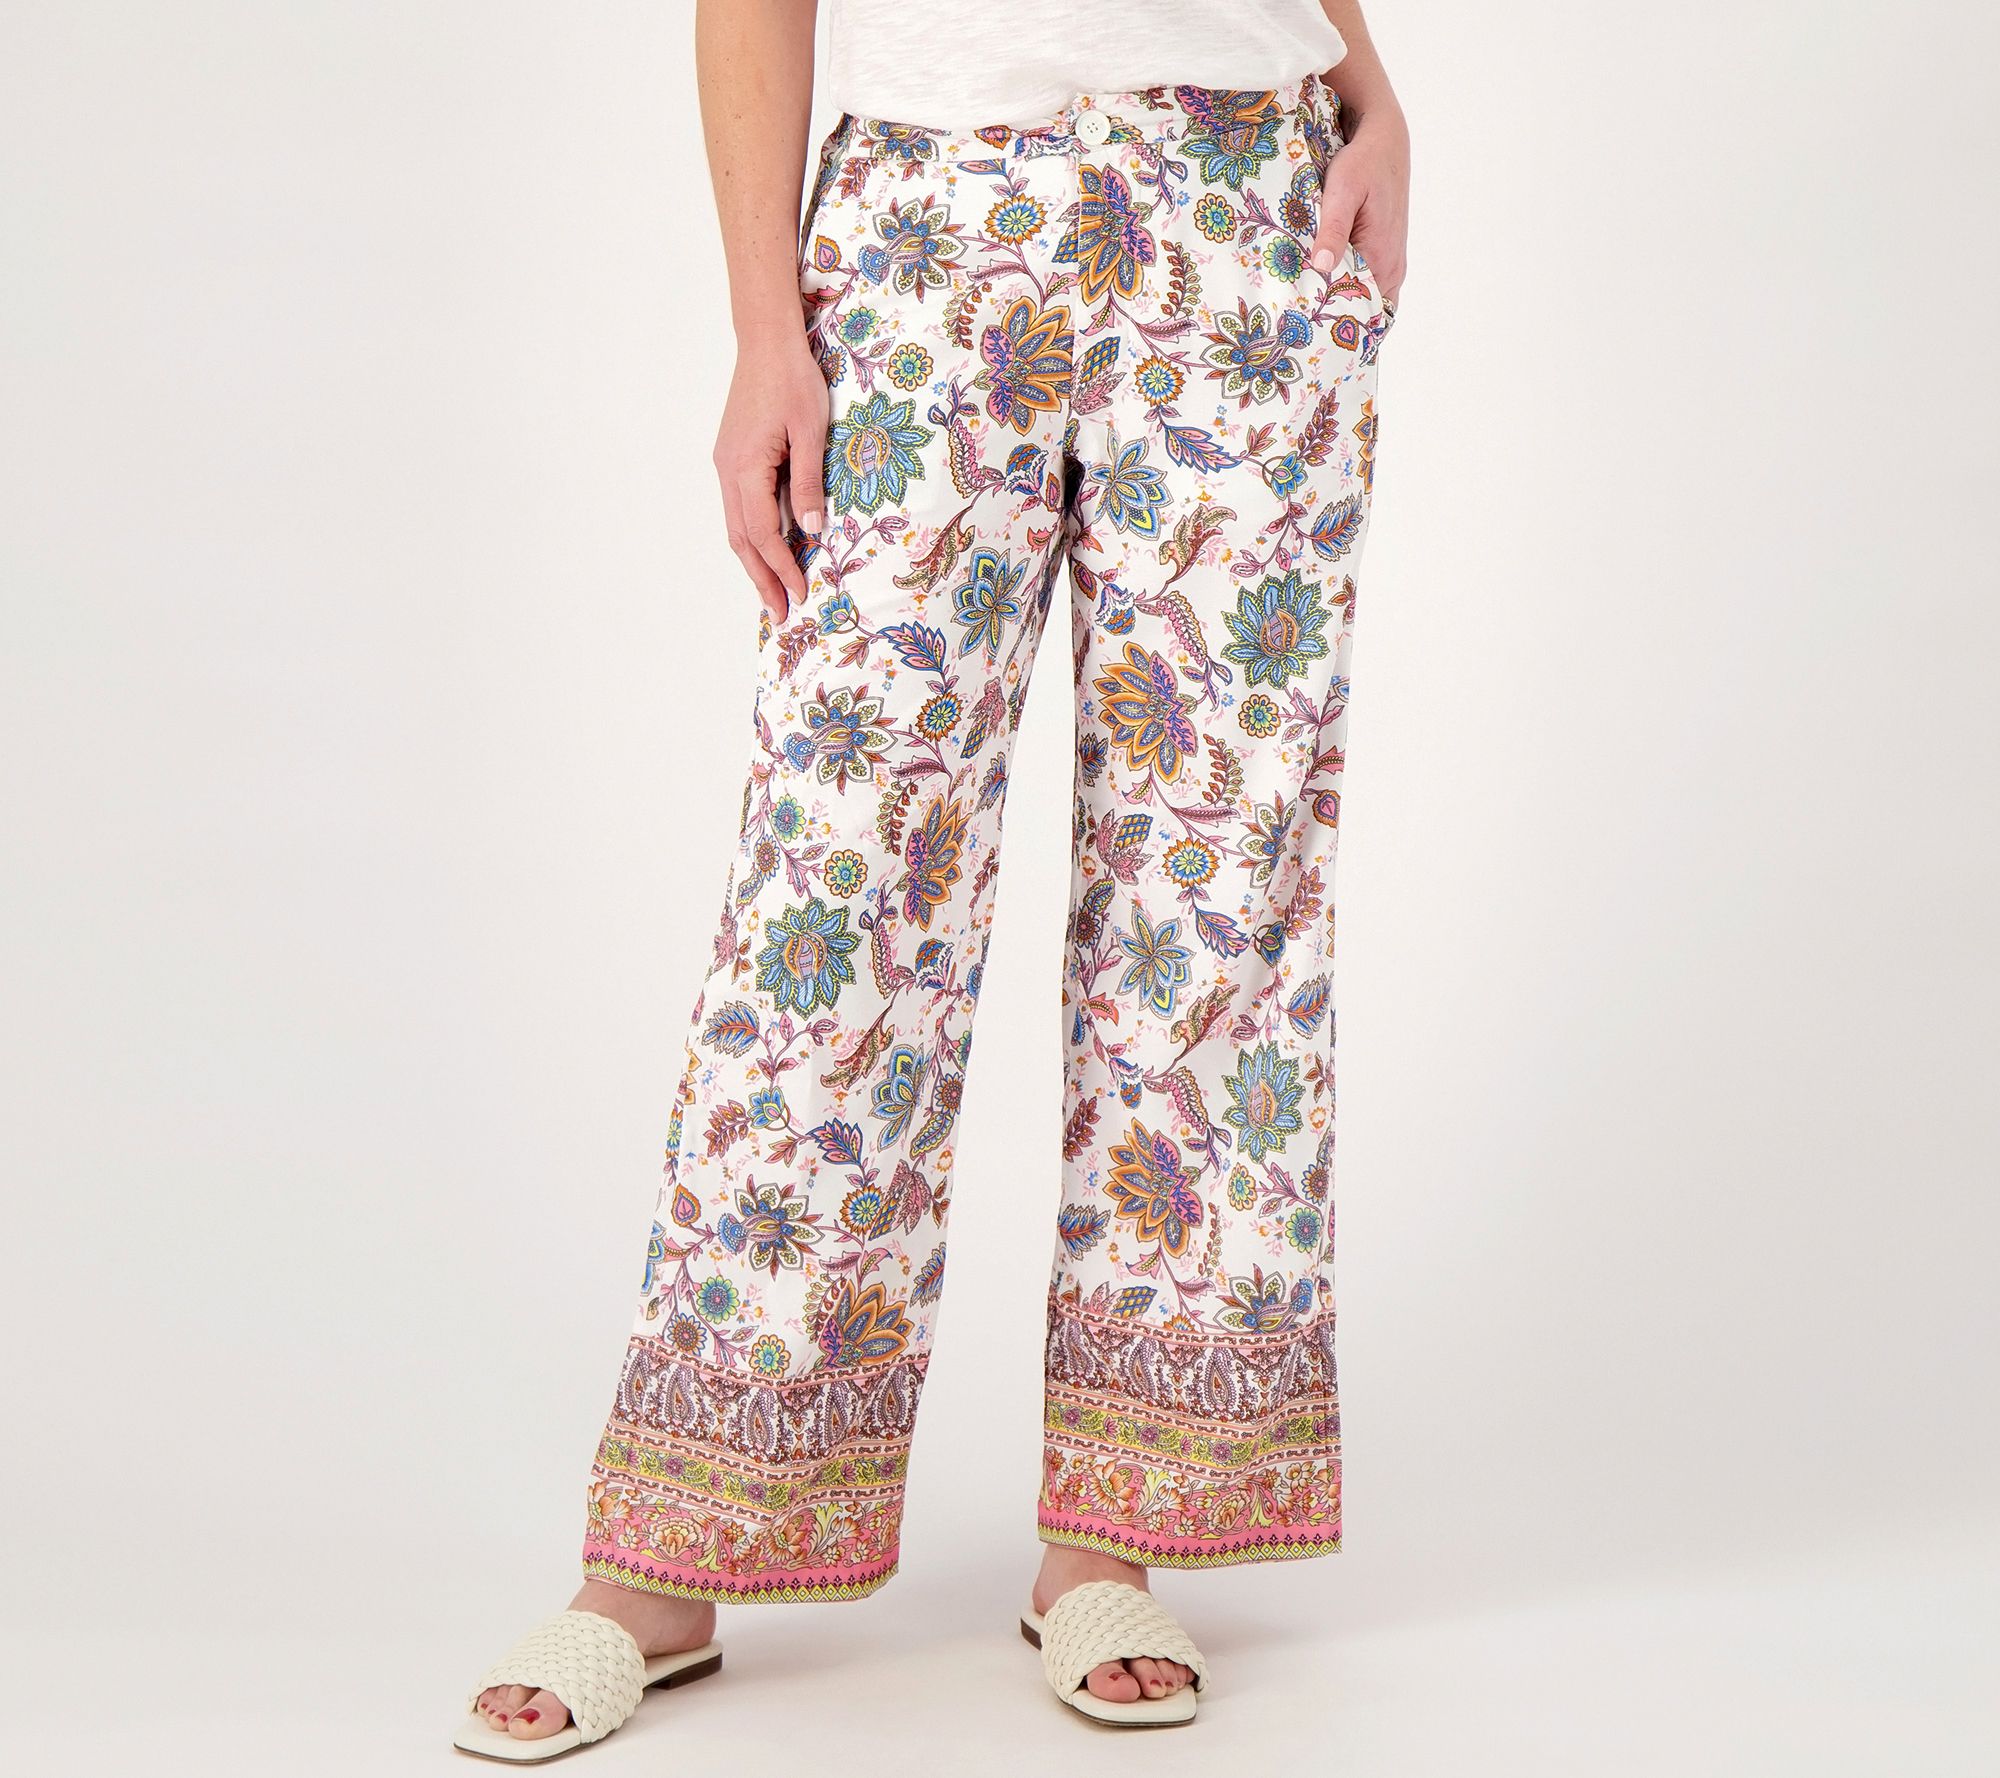 Tolani Printed Pant with Elastic Waist and Pockets - QVC.com